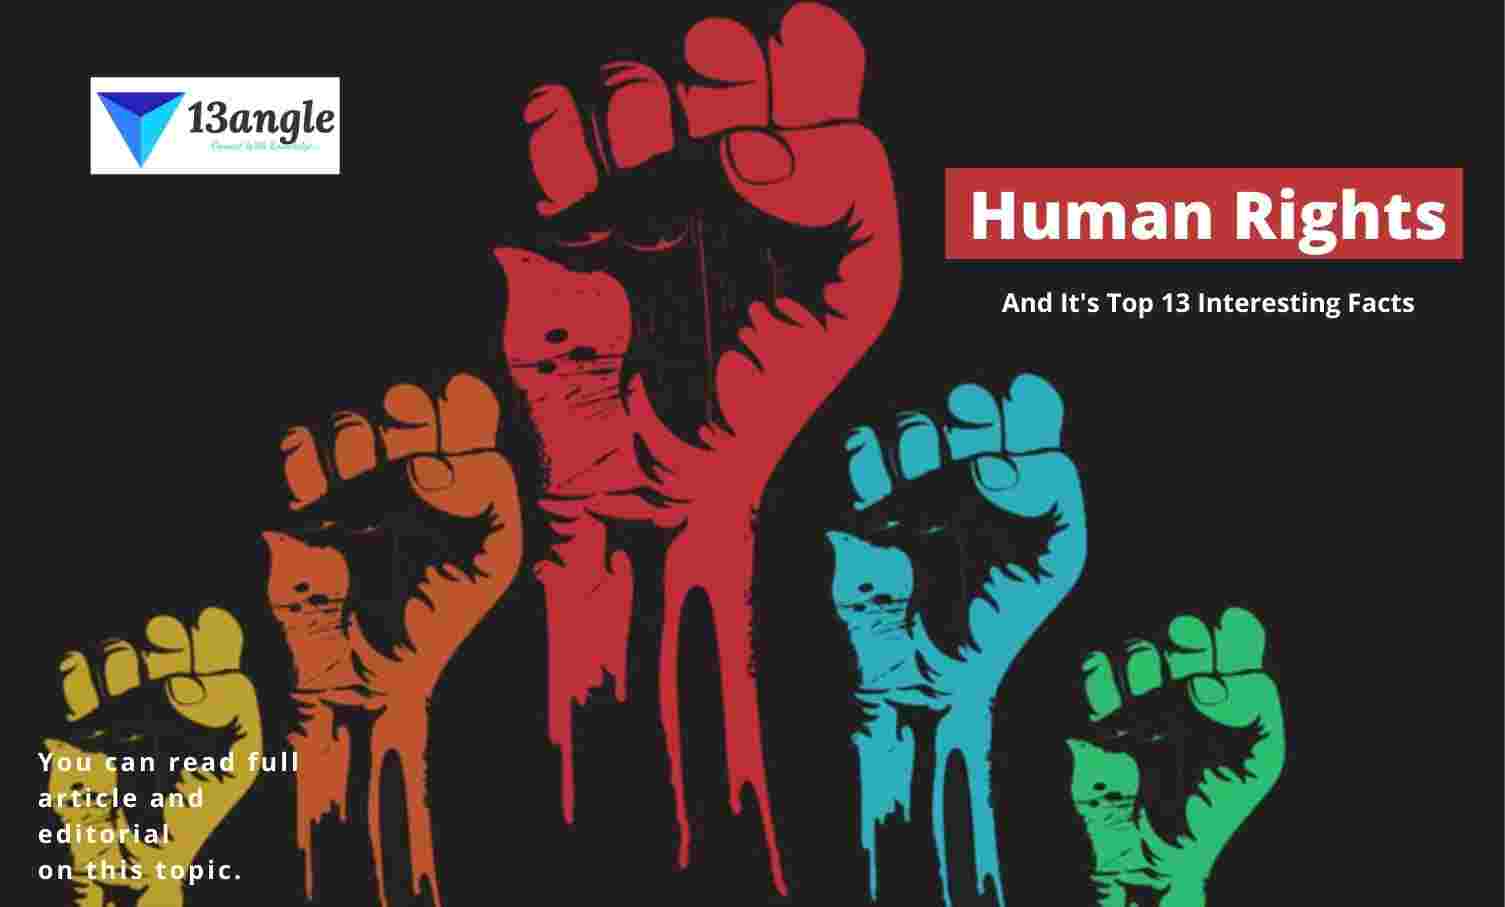 Human Rights And It's Top 13 Interesting Facts- 13angle.com